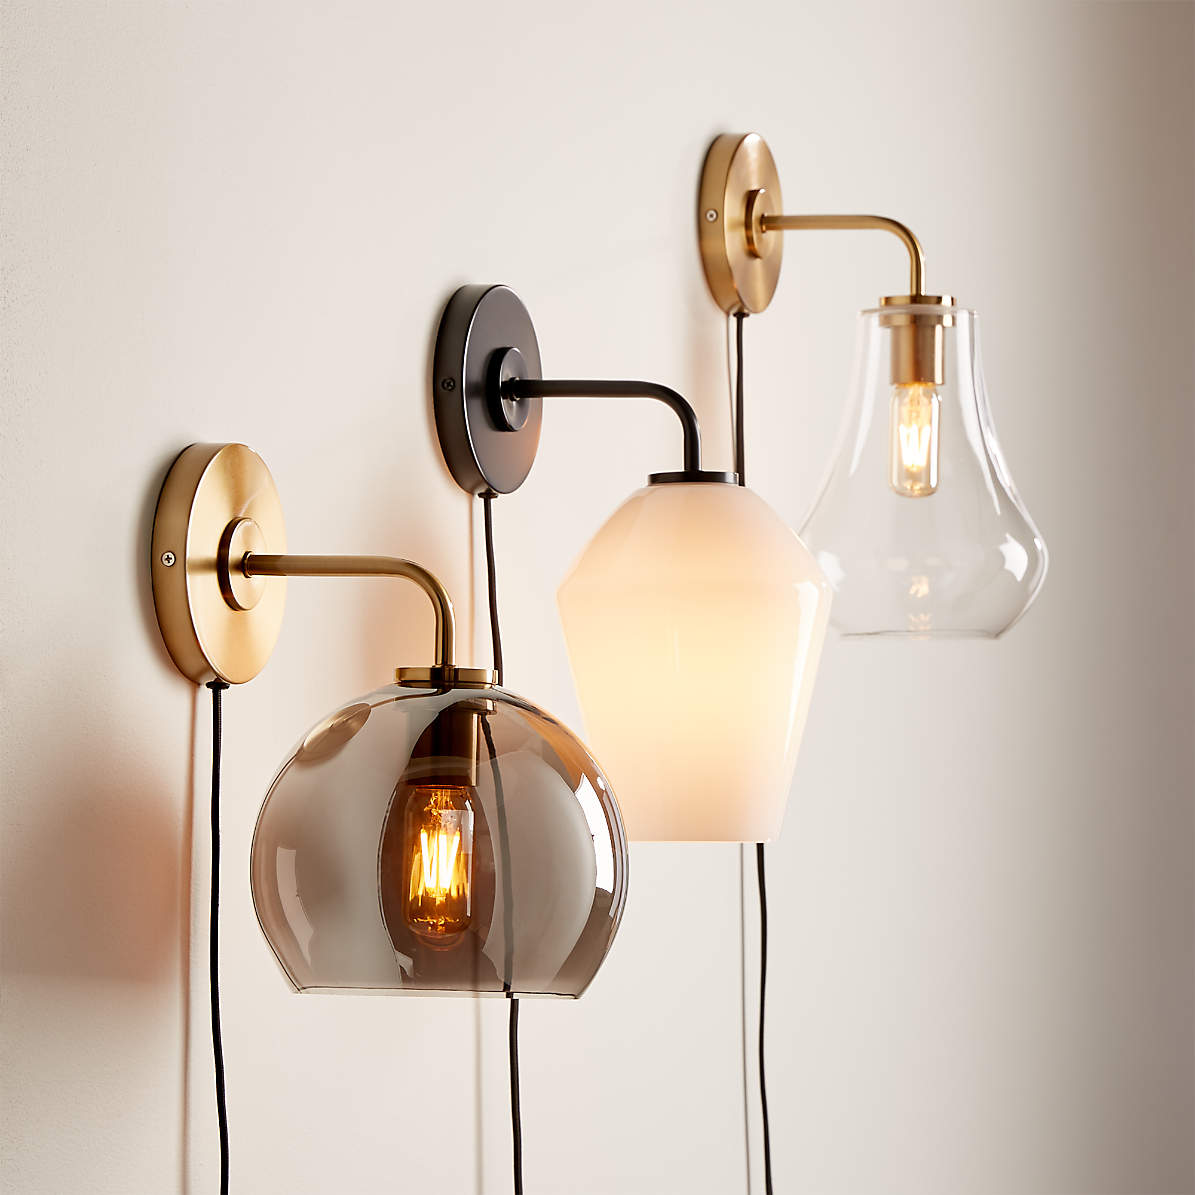 How To Hang Wall Sconces - Morsale.com